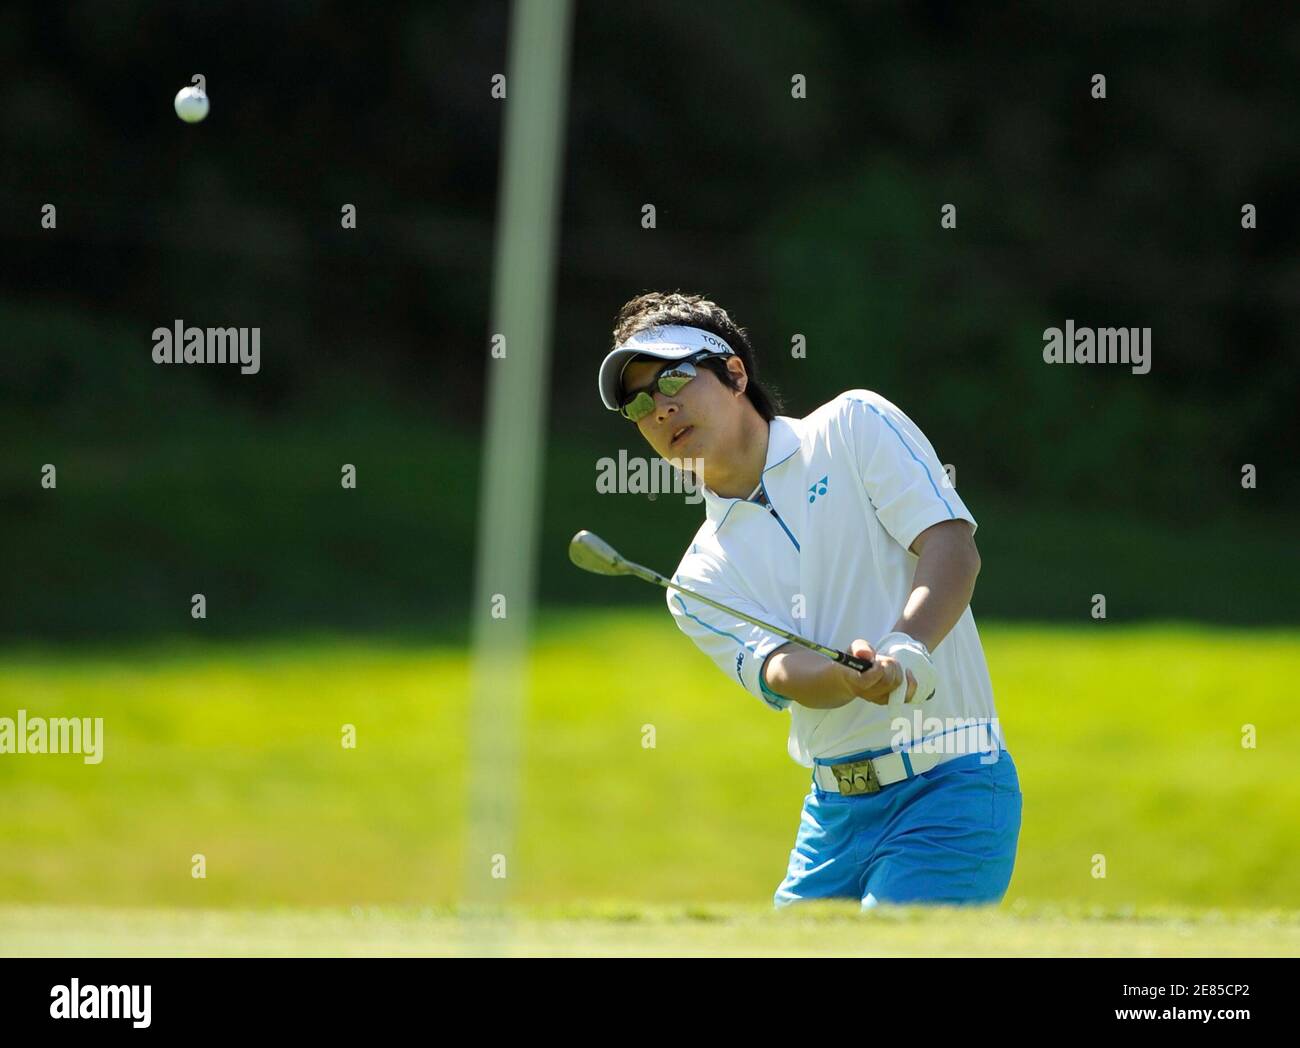 Golfer Ryo Ishikawa, 17, of Japan, chips from the fringe on the sixth hole during the first round of the Northern Trust Open golf tournament in the Pacific Palisades area of Los Angeles February 19, 2009. REUTERS/Gus Ruelas (UNITED STATES) Stock Photo